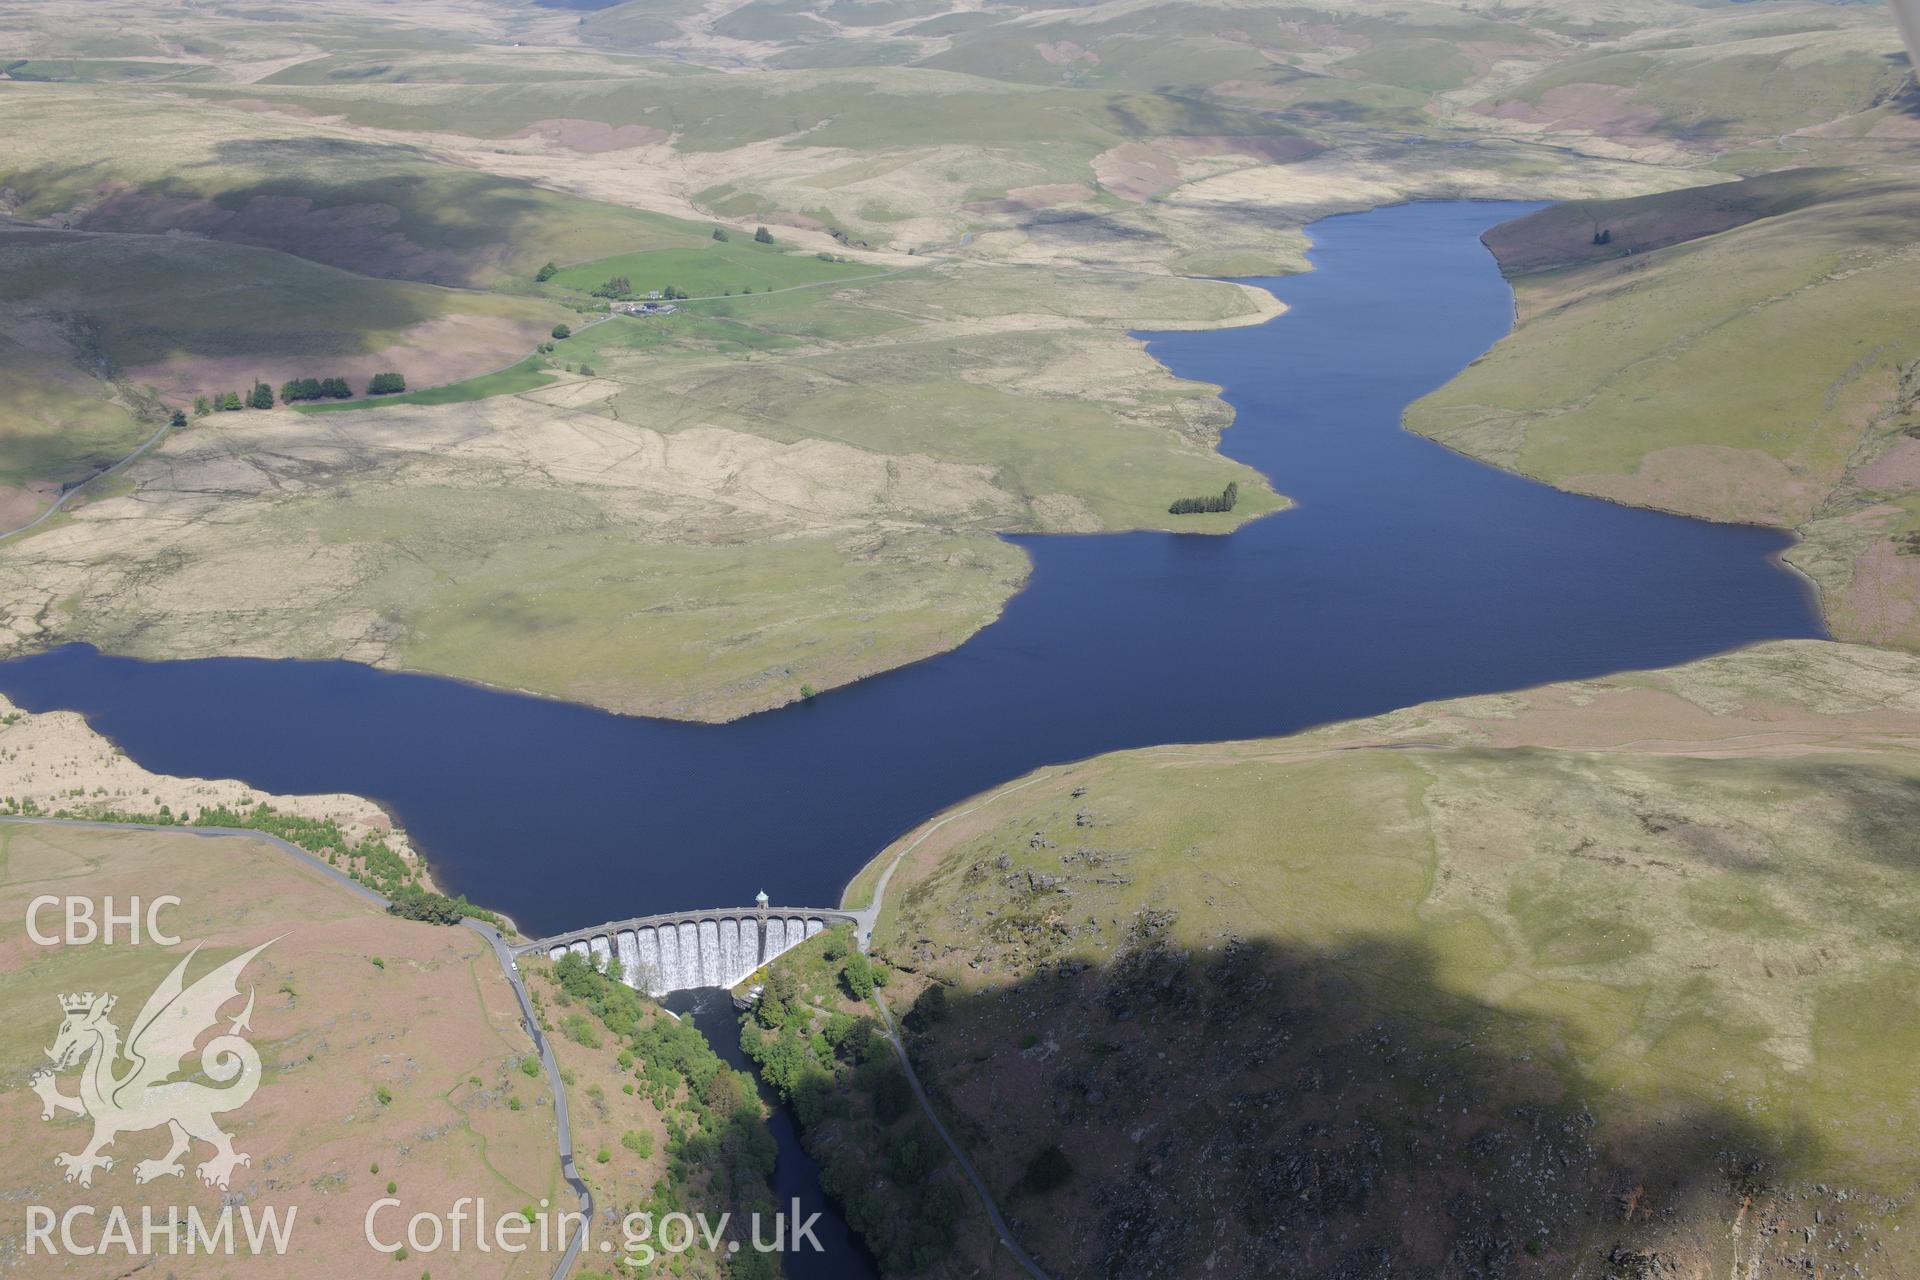 Pen-y-Garreg reservoir, and Craig Goch dam and valve tower. Oblique aerial photograph taken during the Royal Commission's programme of archaeological aerial reconnaissance by Toby Driver on 3rd June 2015.